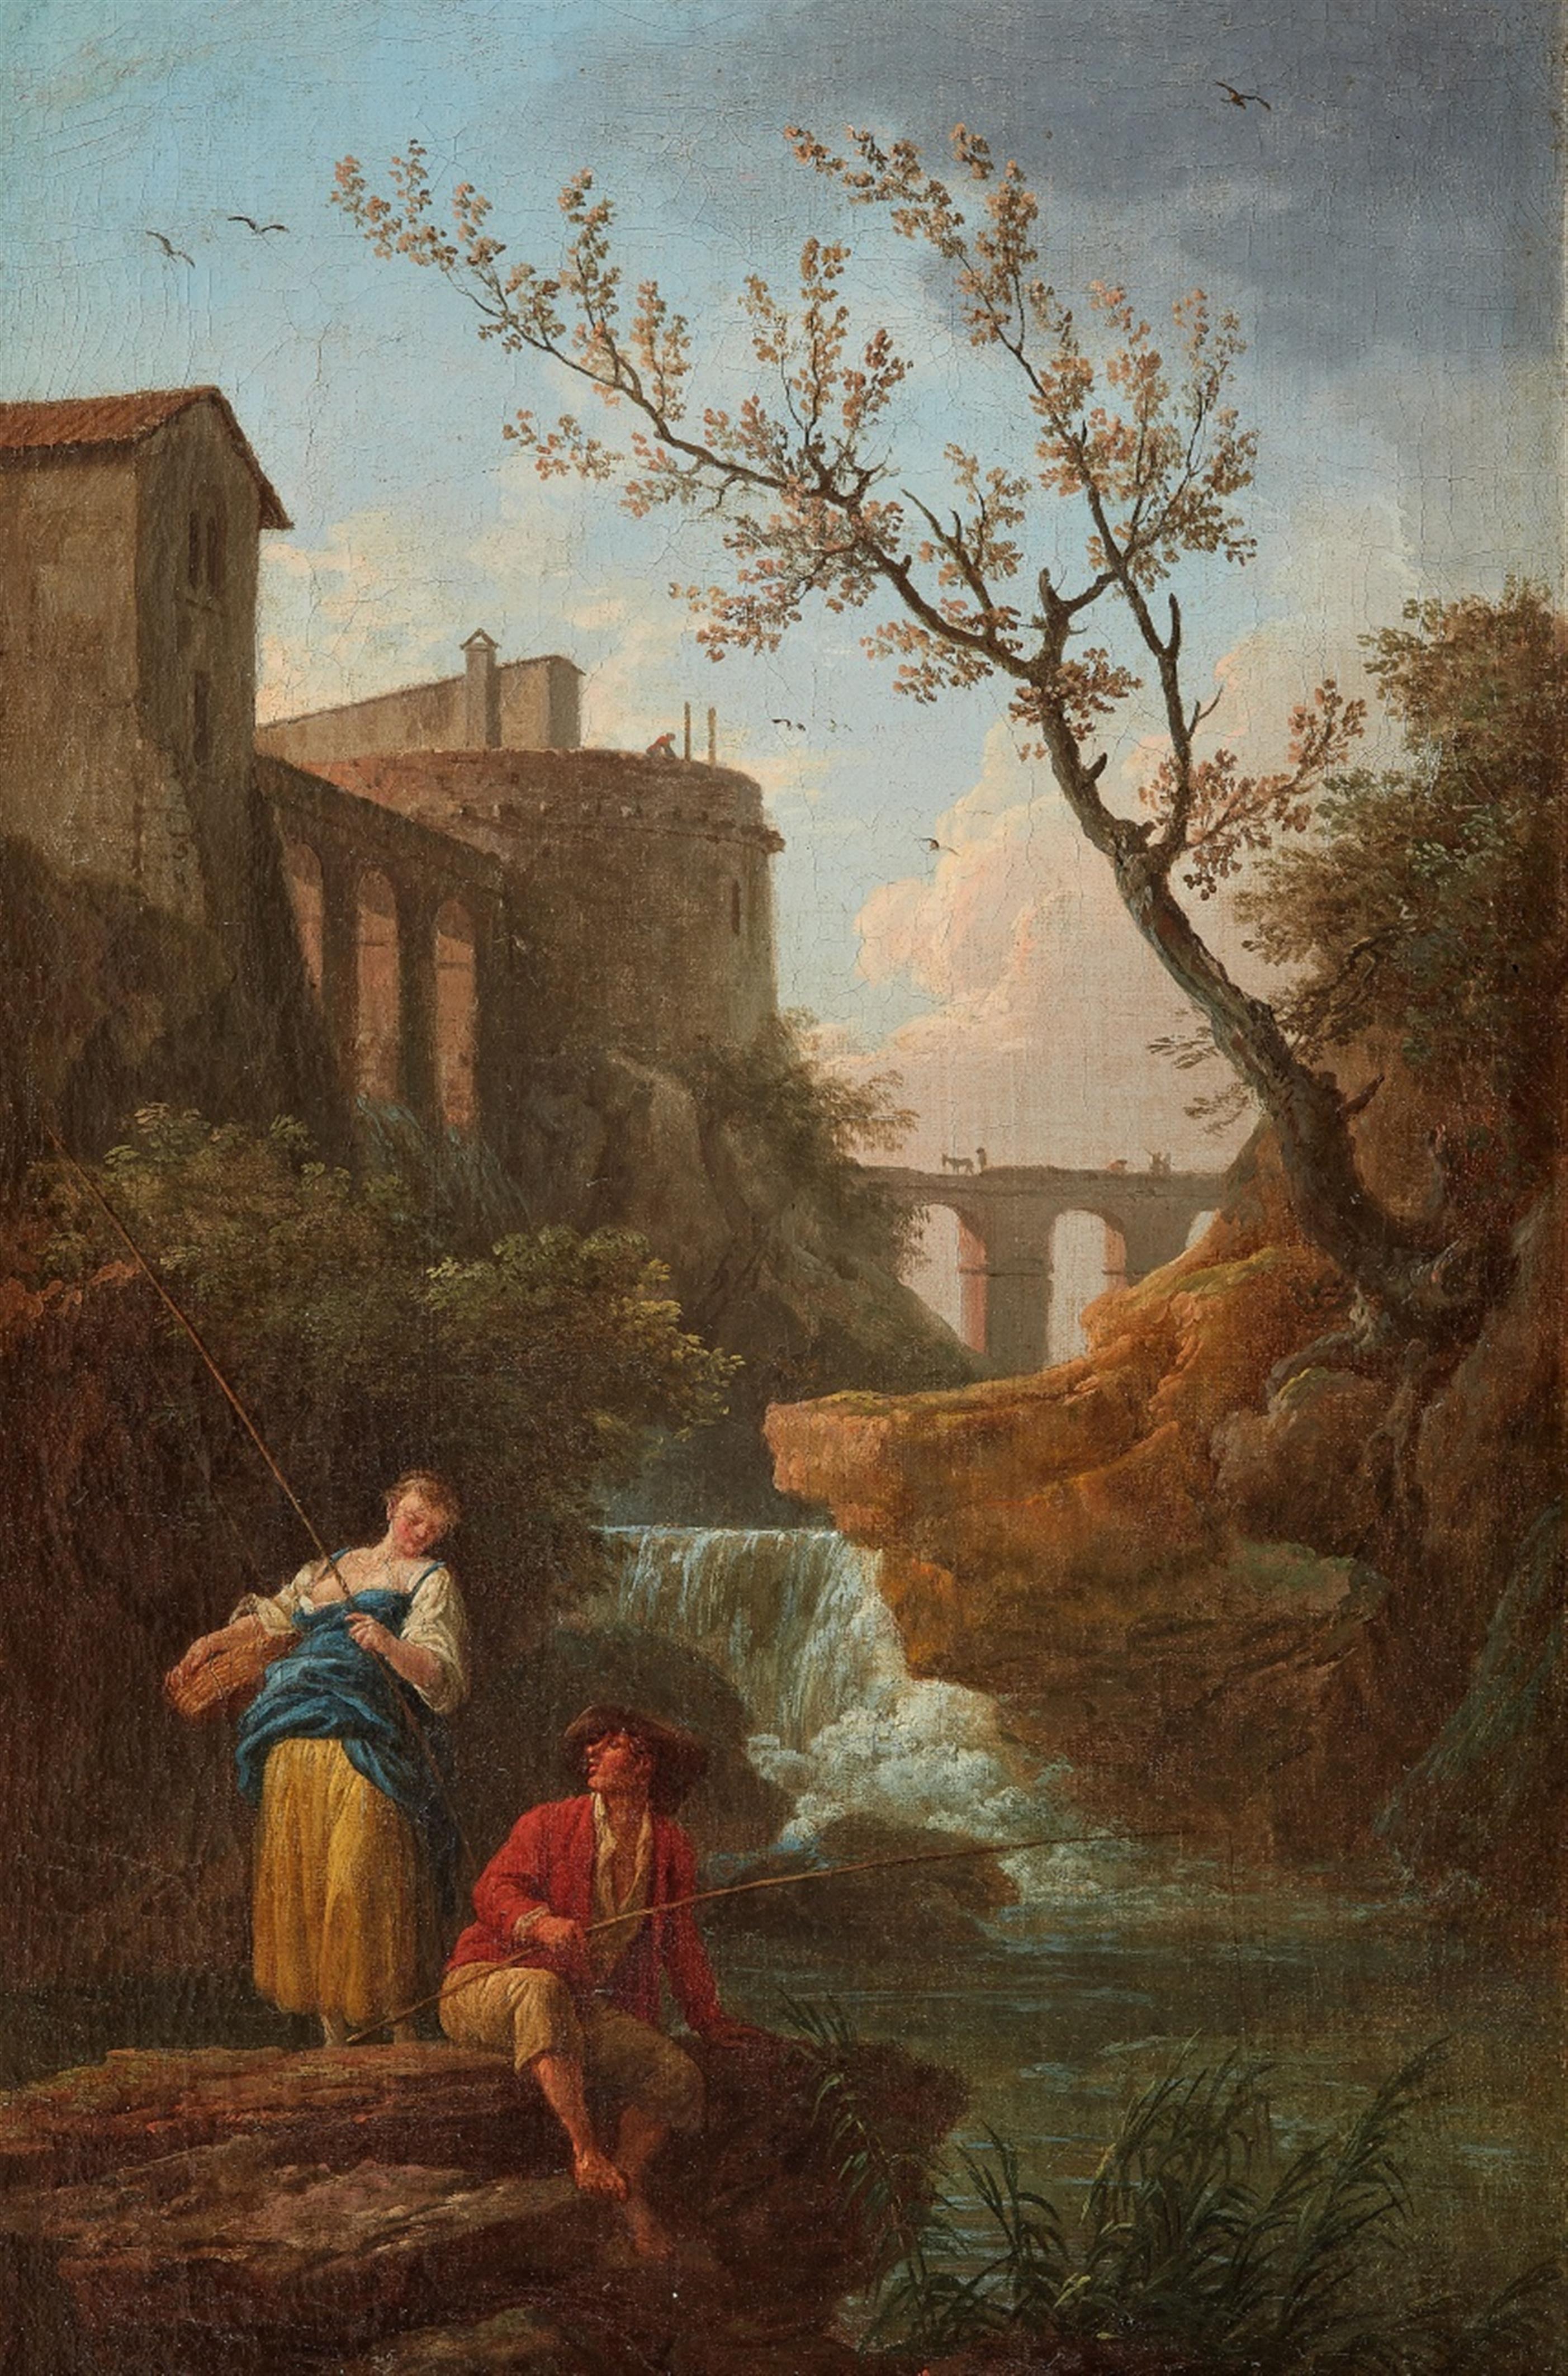 Charles François Lacroix de Marseille, attributed to - Pair of Fishers near Tivoli - image-1